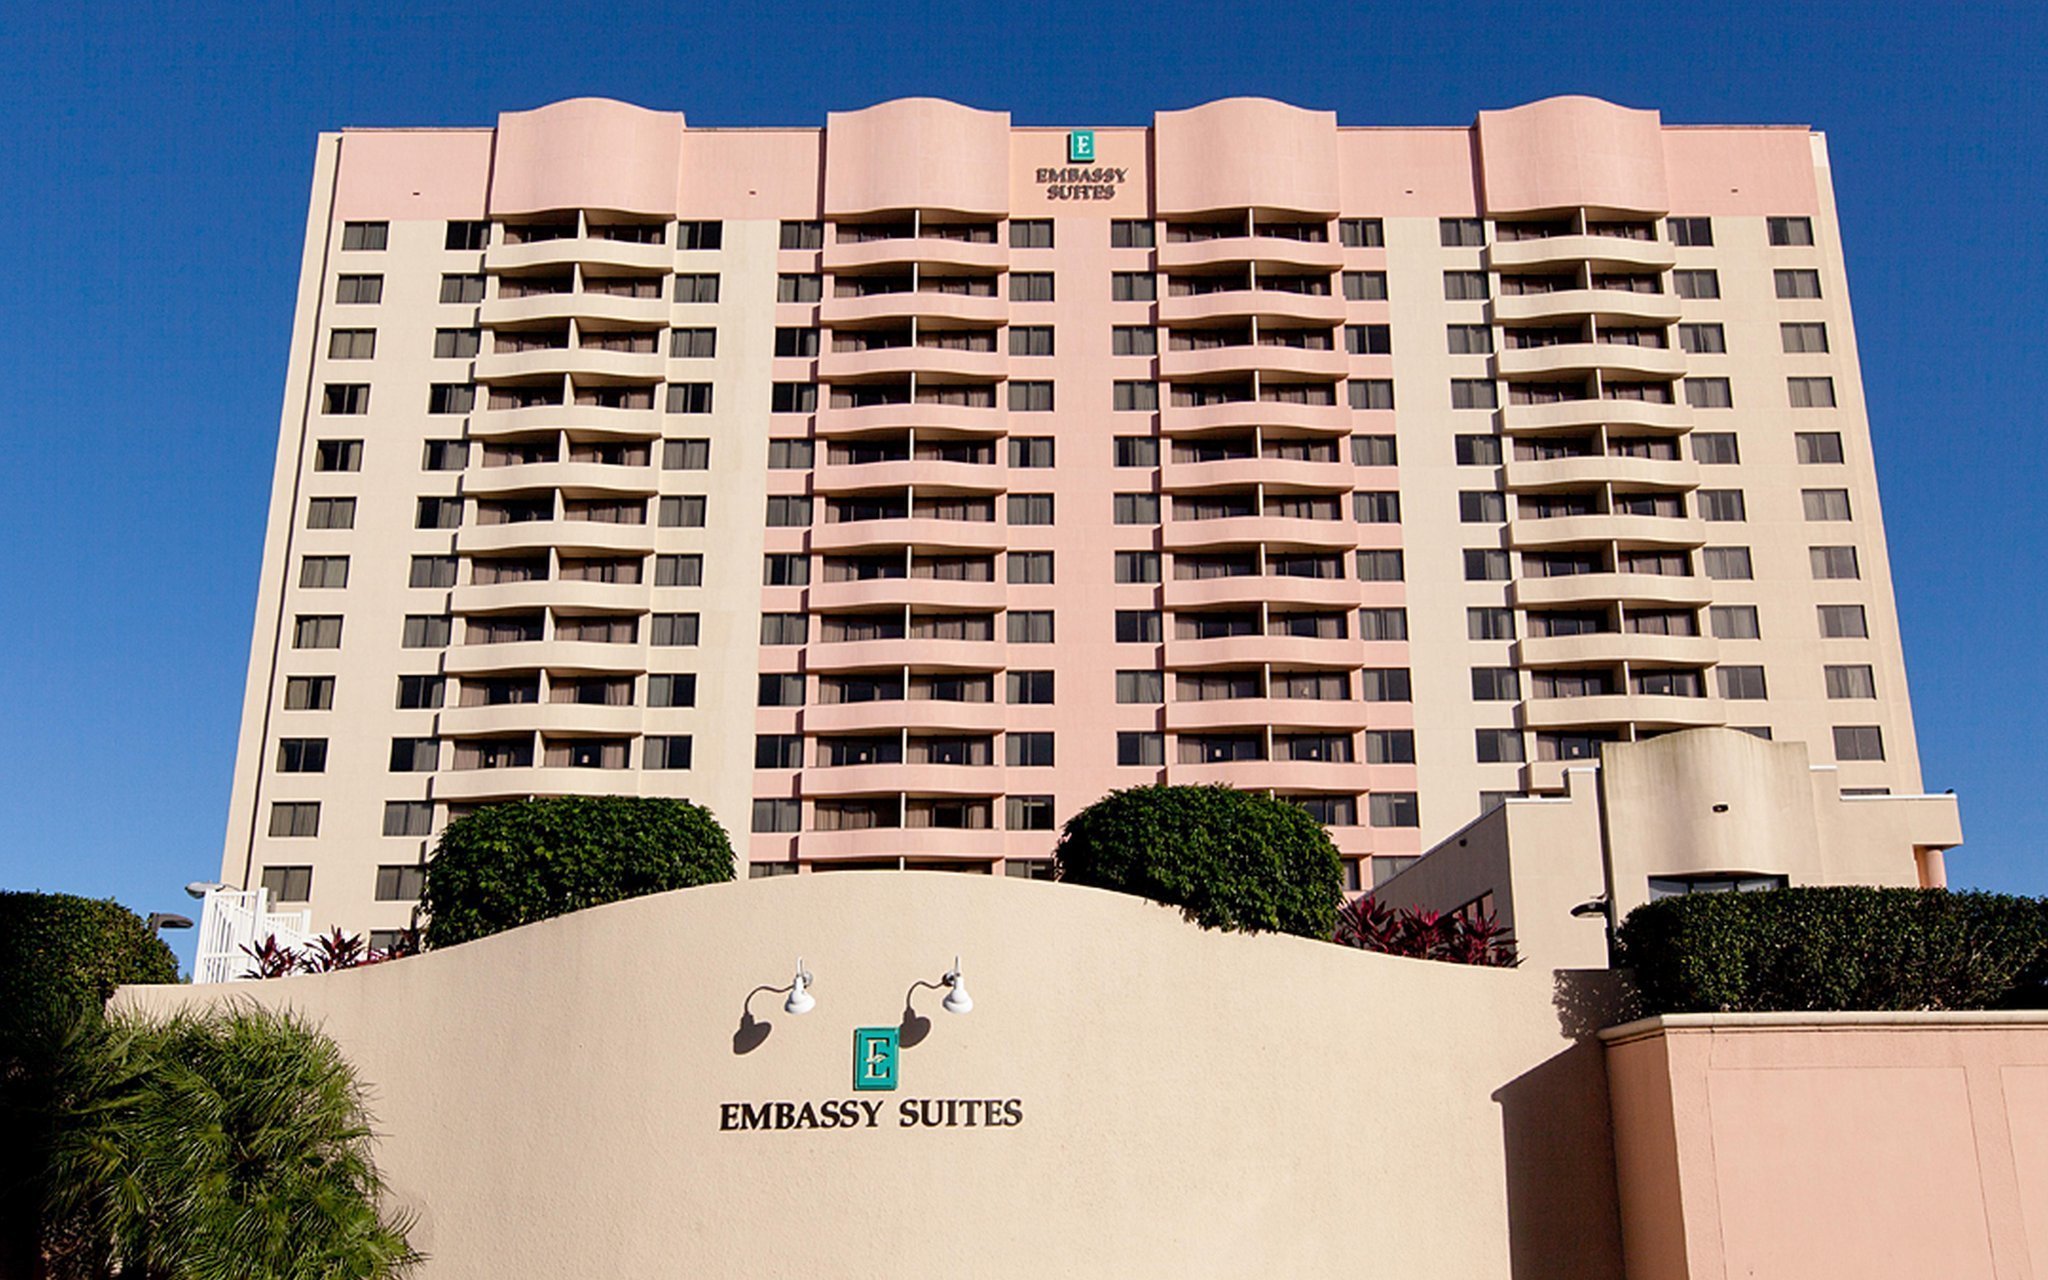 Photo of Embassy Suites by Hilton Tampa Airport Westshore, Tampa, FL